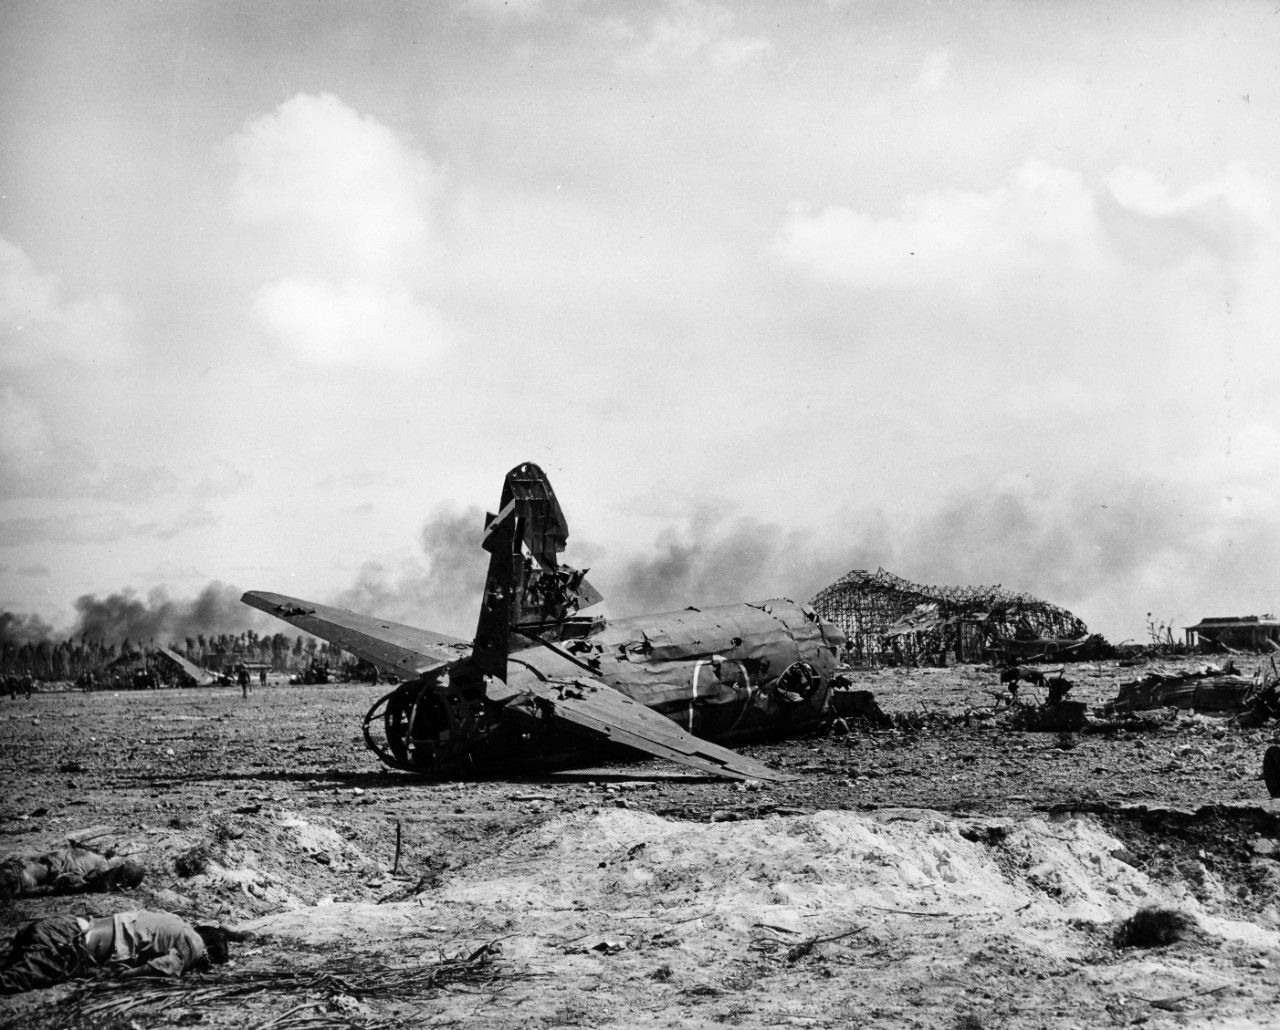 Airfield destruction and wrecked aircraft, "Zero" and Betty" types on the island of Roi in the Kwakjalein after invasion, February 1944. From the VADM Robert C. Giffen Photo Collection. 